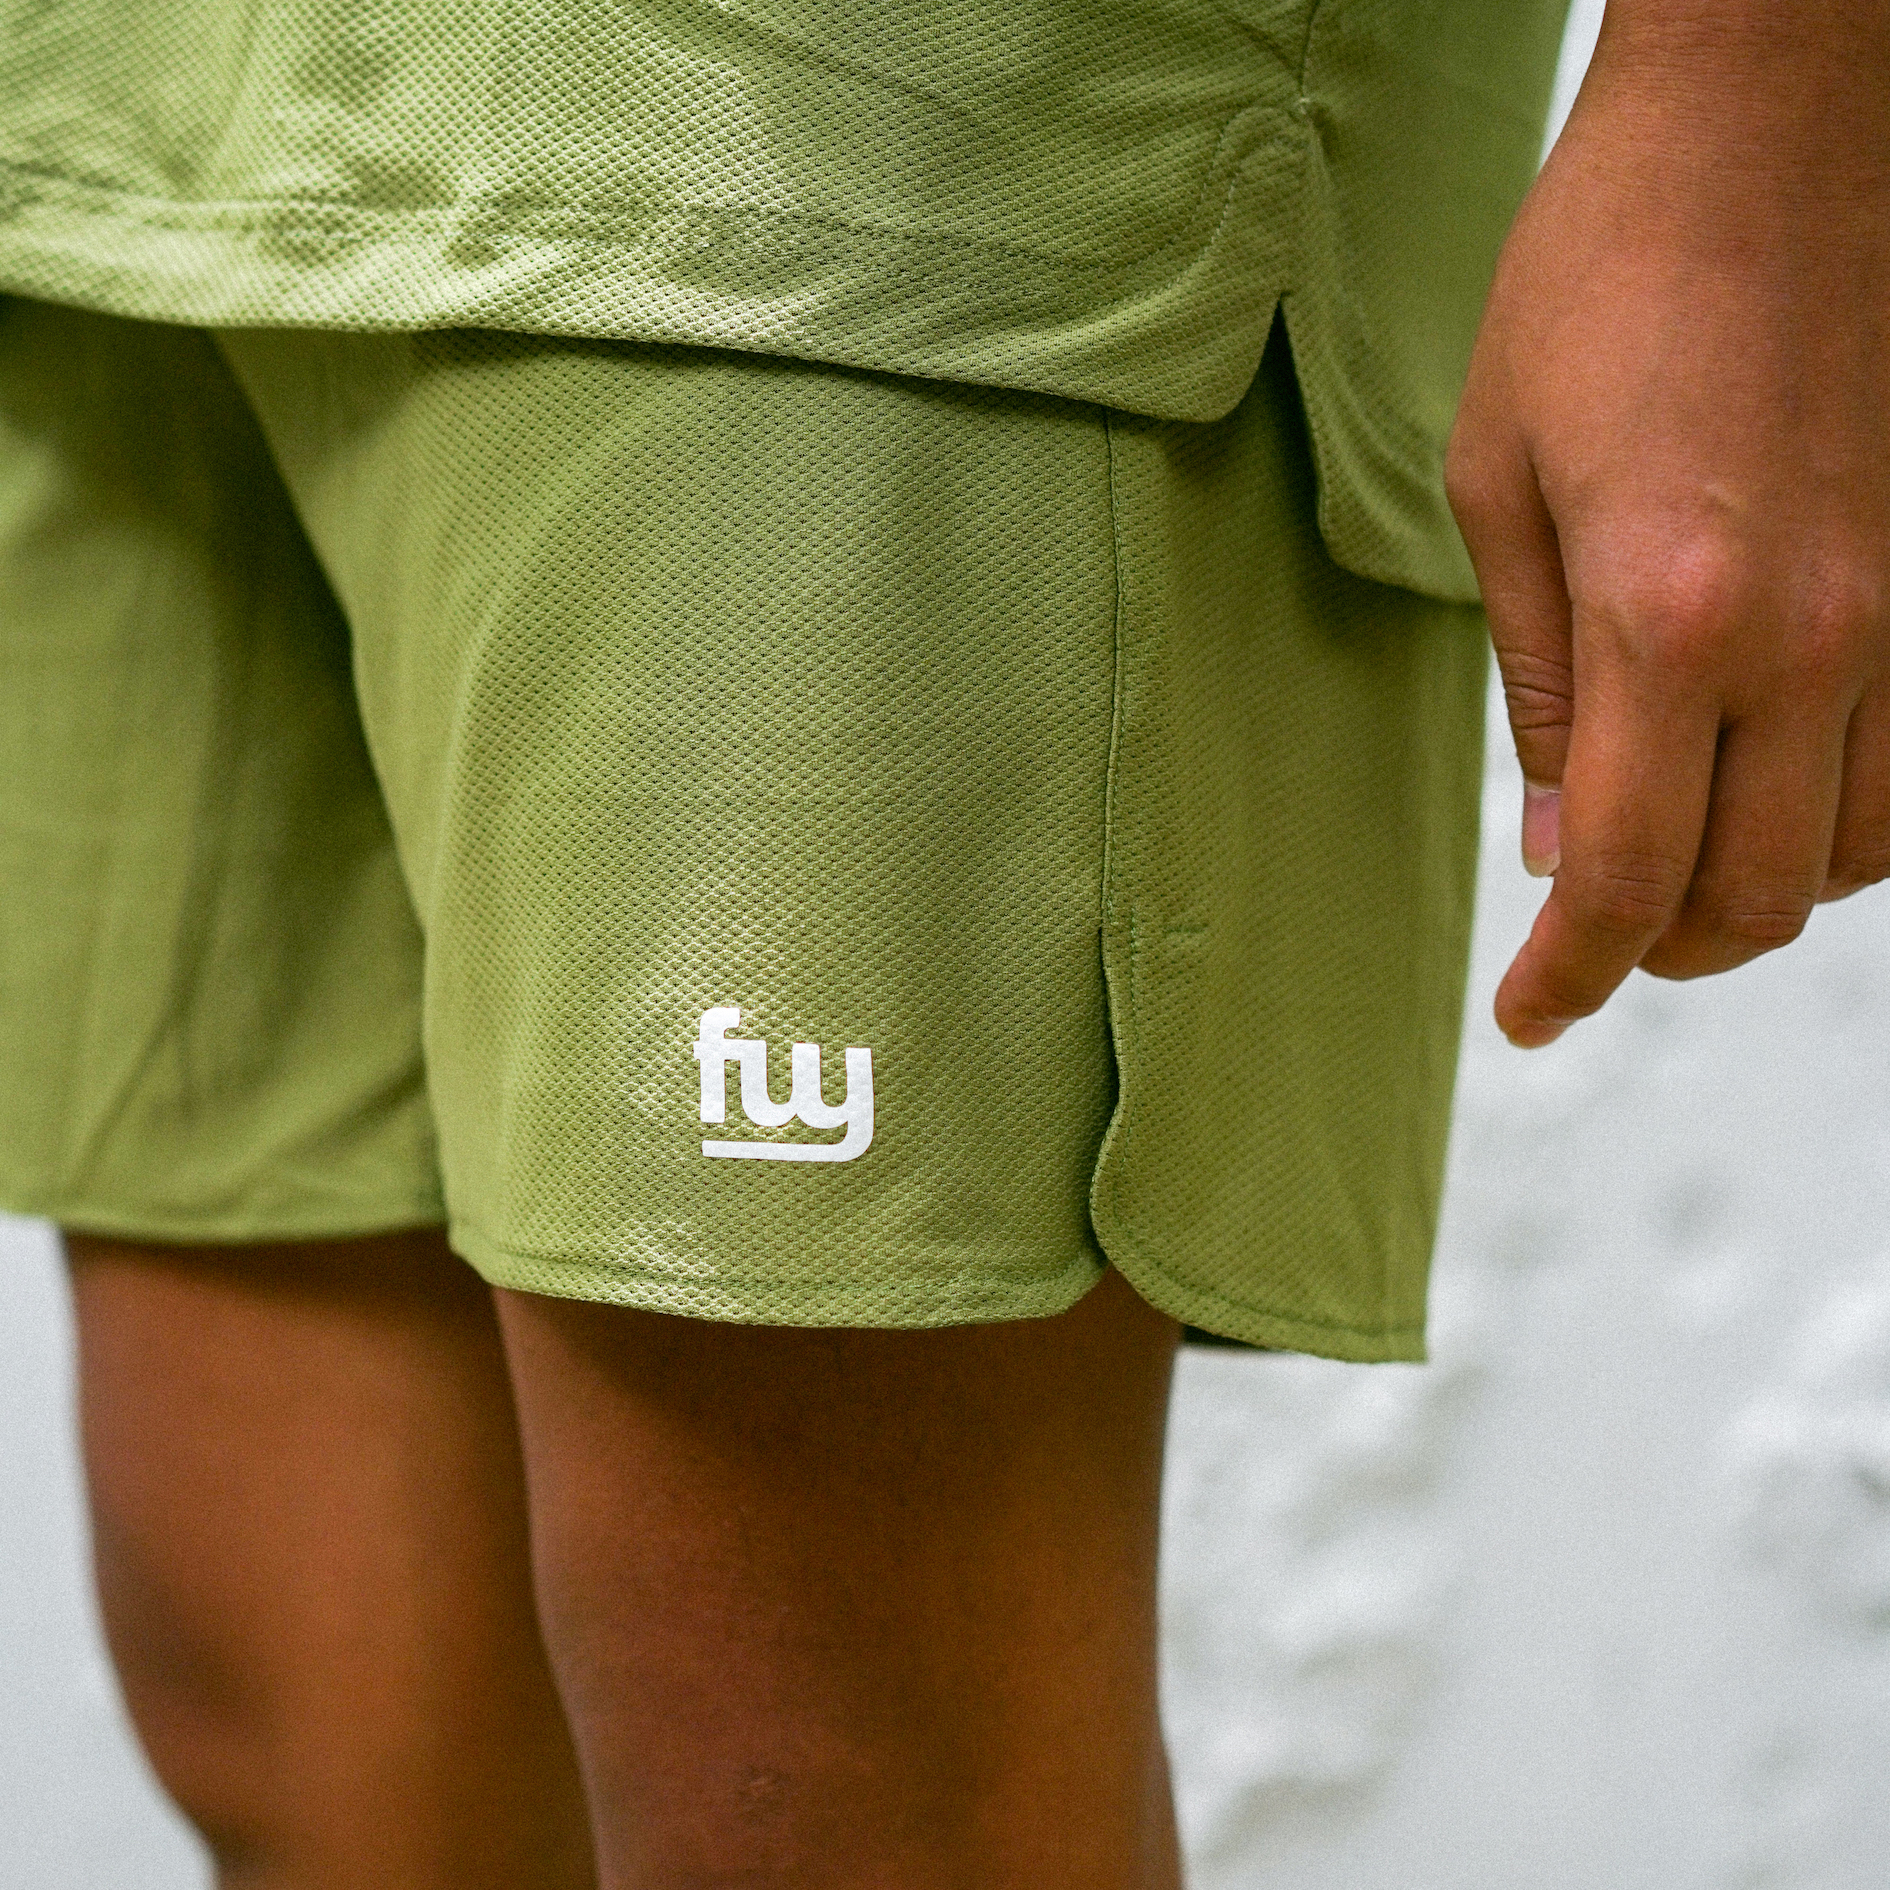 Men's Shorts in Lime Green